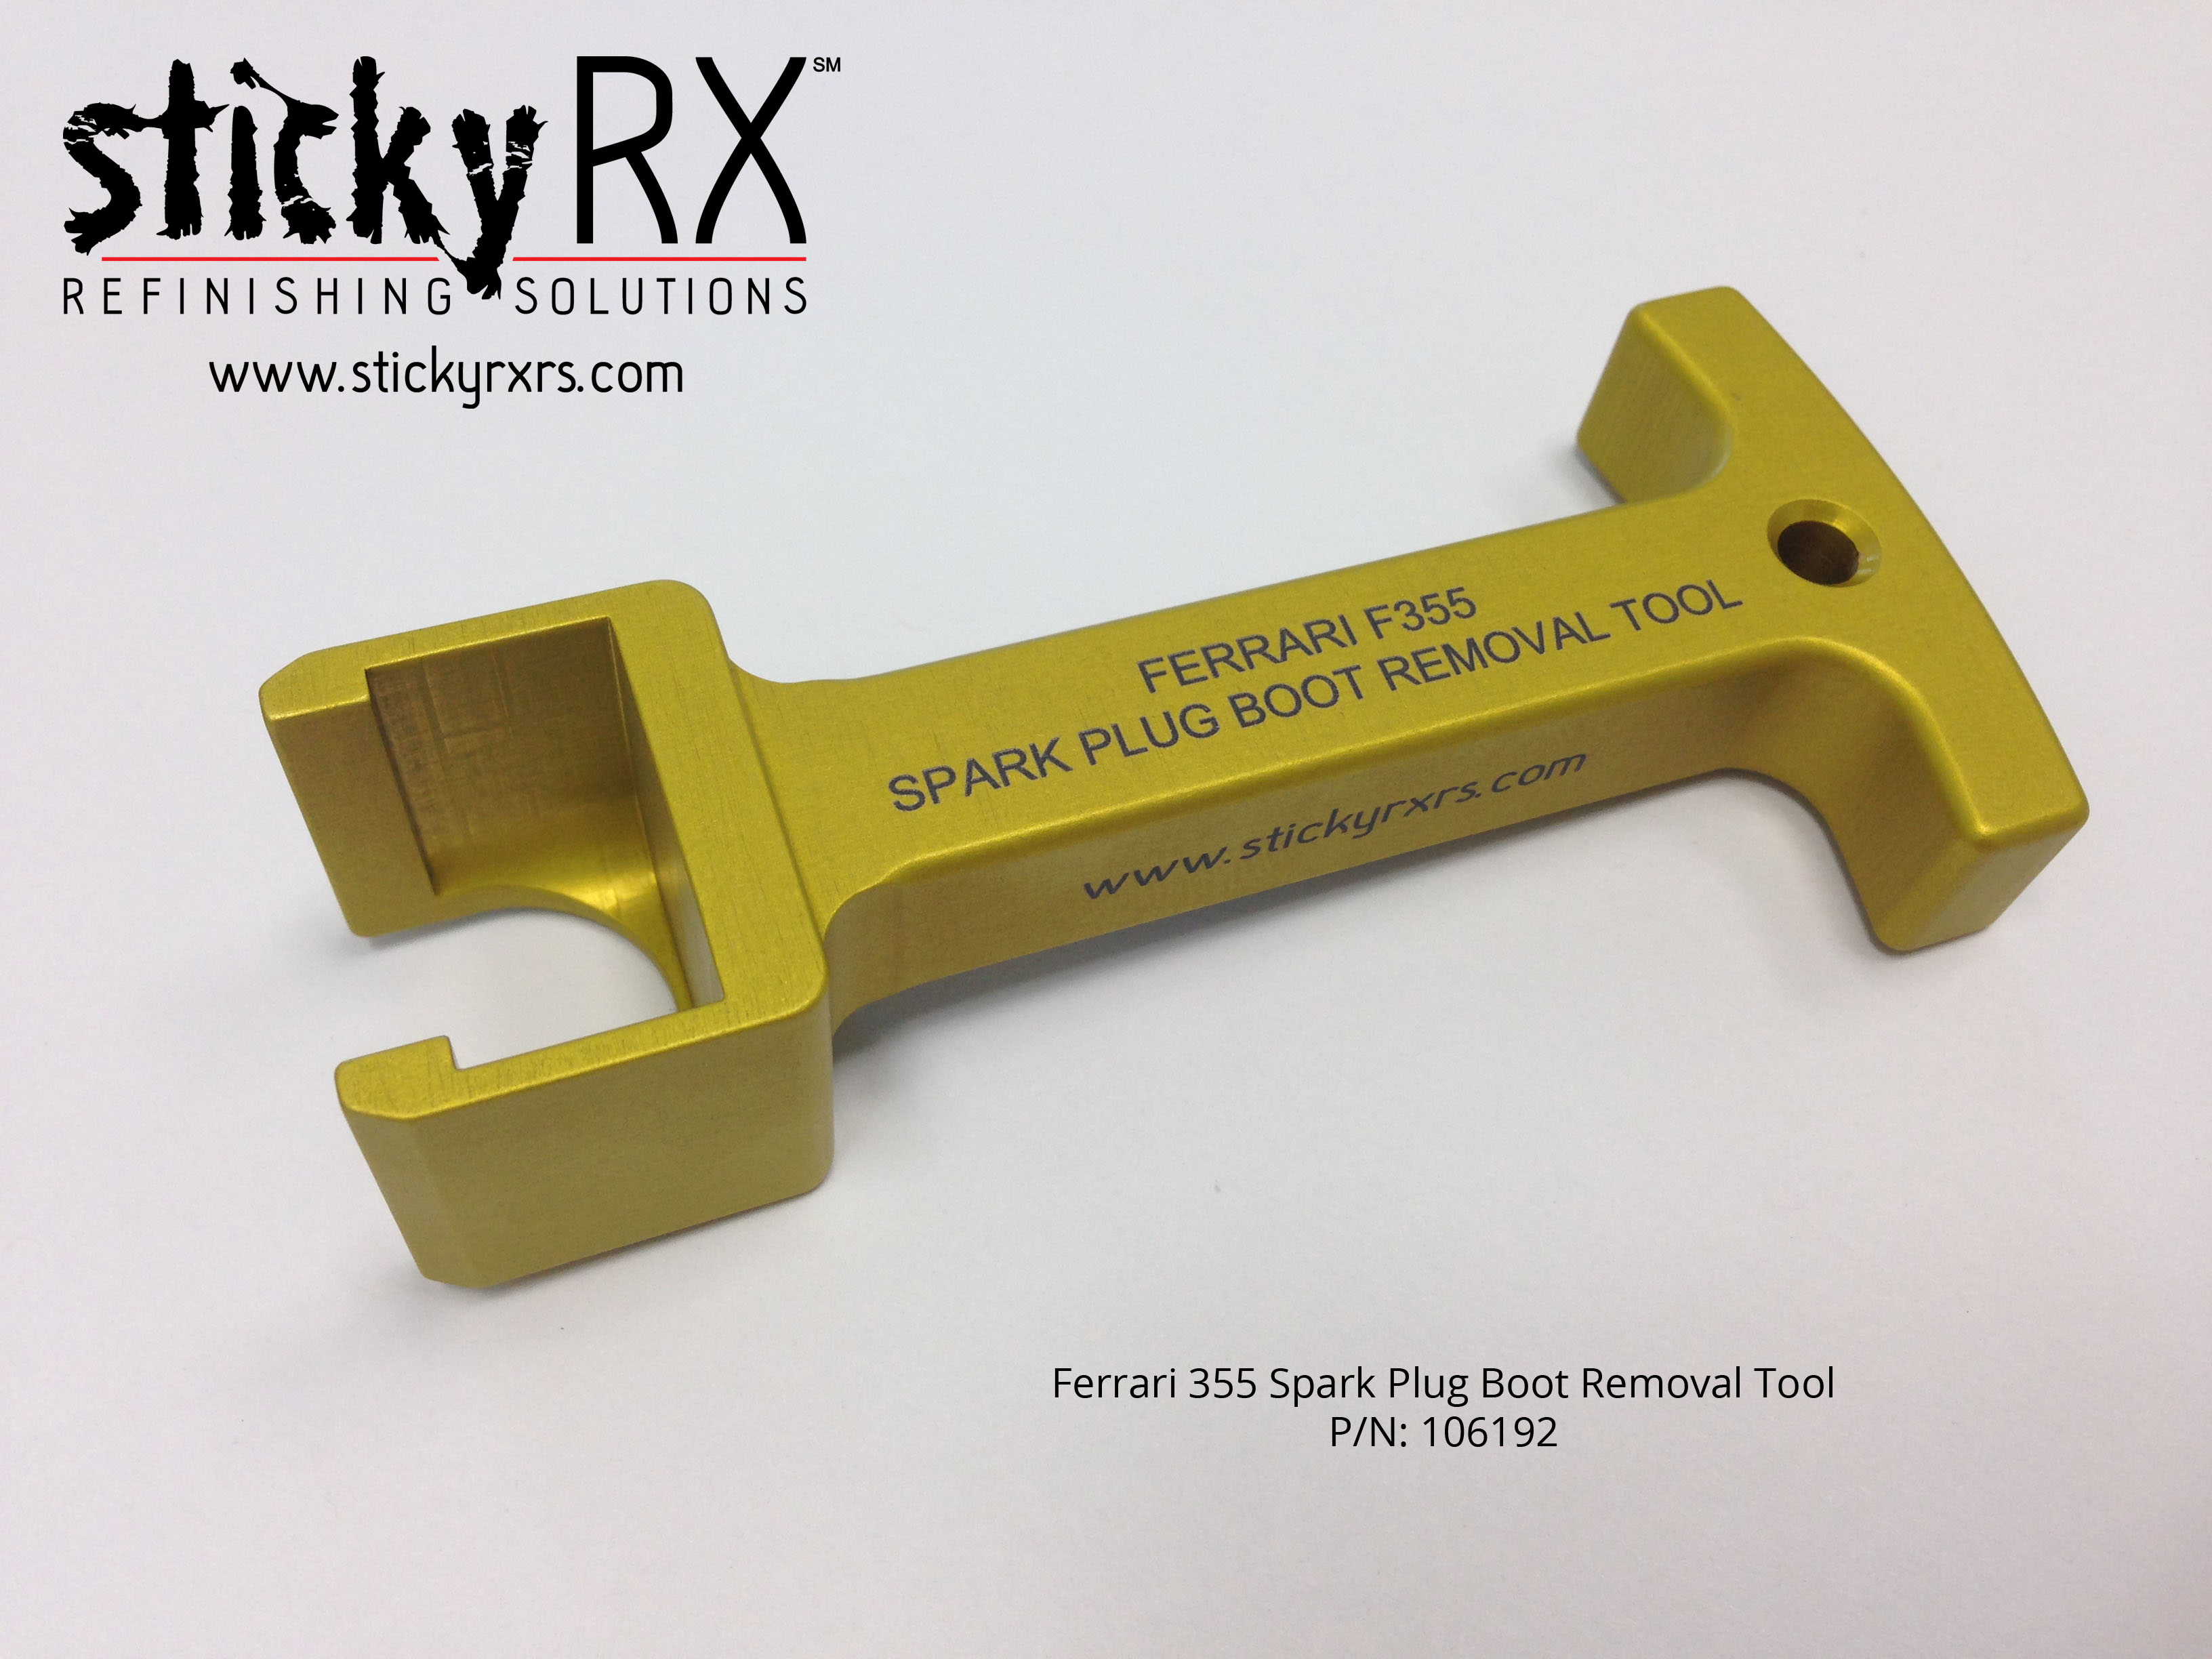 Sticky RX Refinishing Solutions Ferrari 355 Spark Plug Boot Removal Tool 02